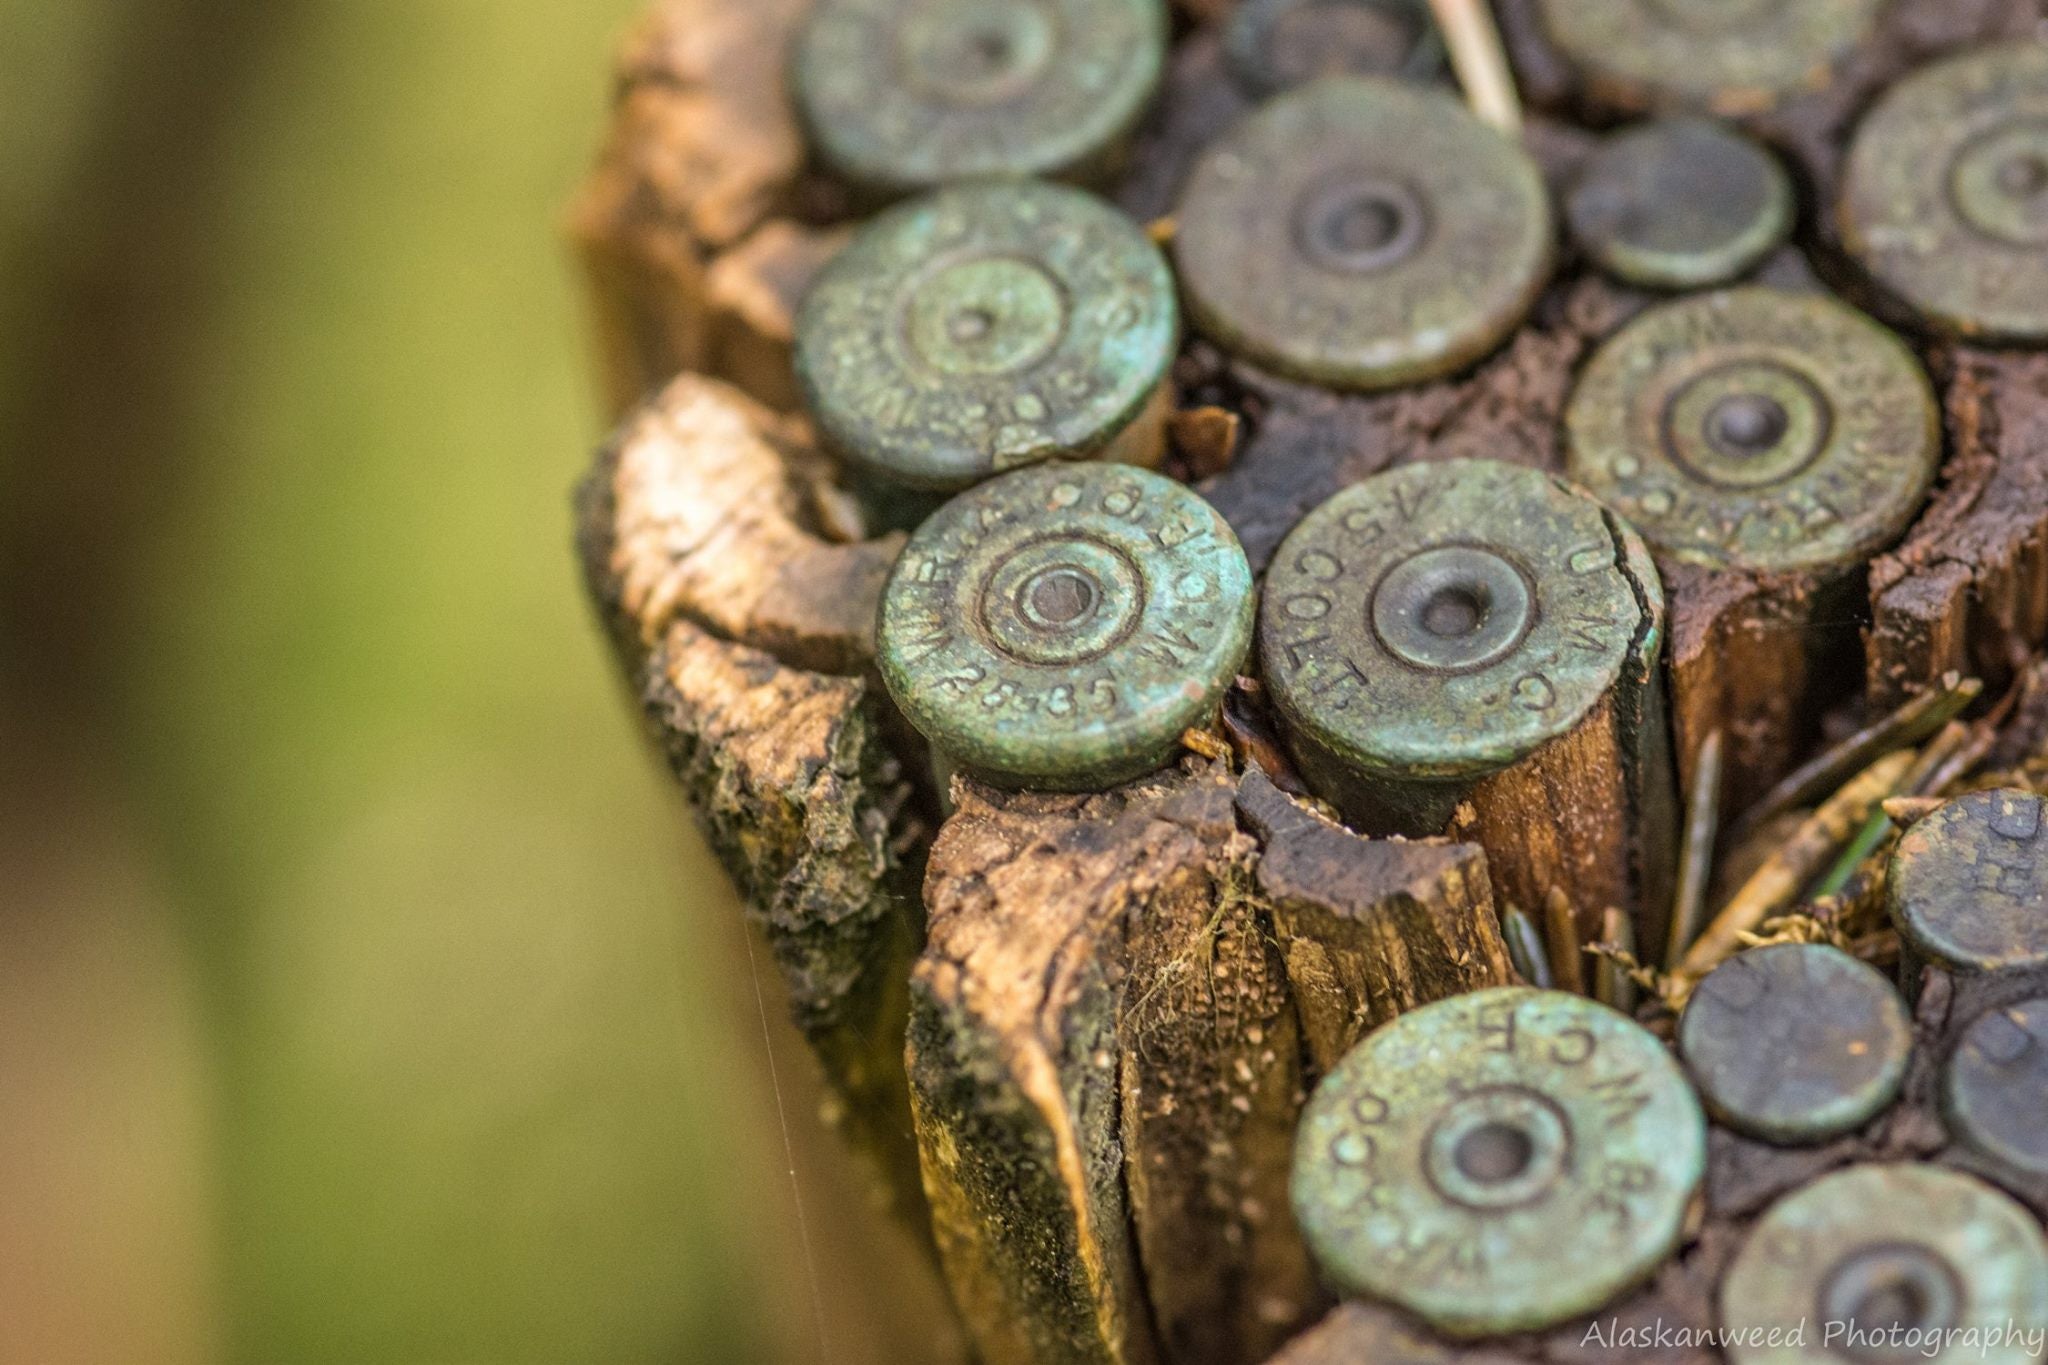 The 25-35 W.C.F. was one of the most accurate lever-action cartridges around but was "anemic" when it comes to big game hunting, according to "Cartridges of the World."